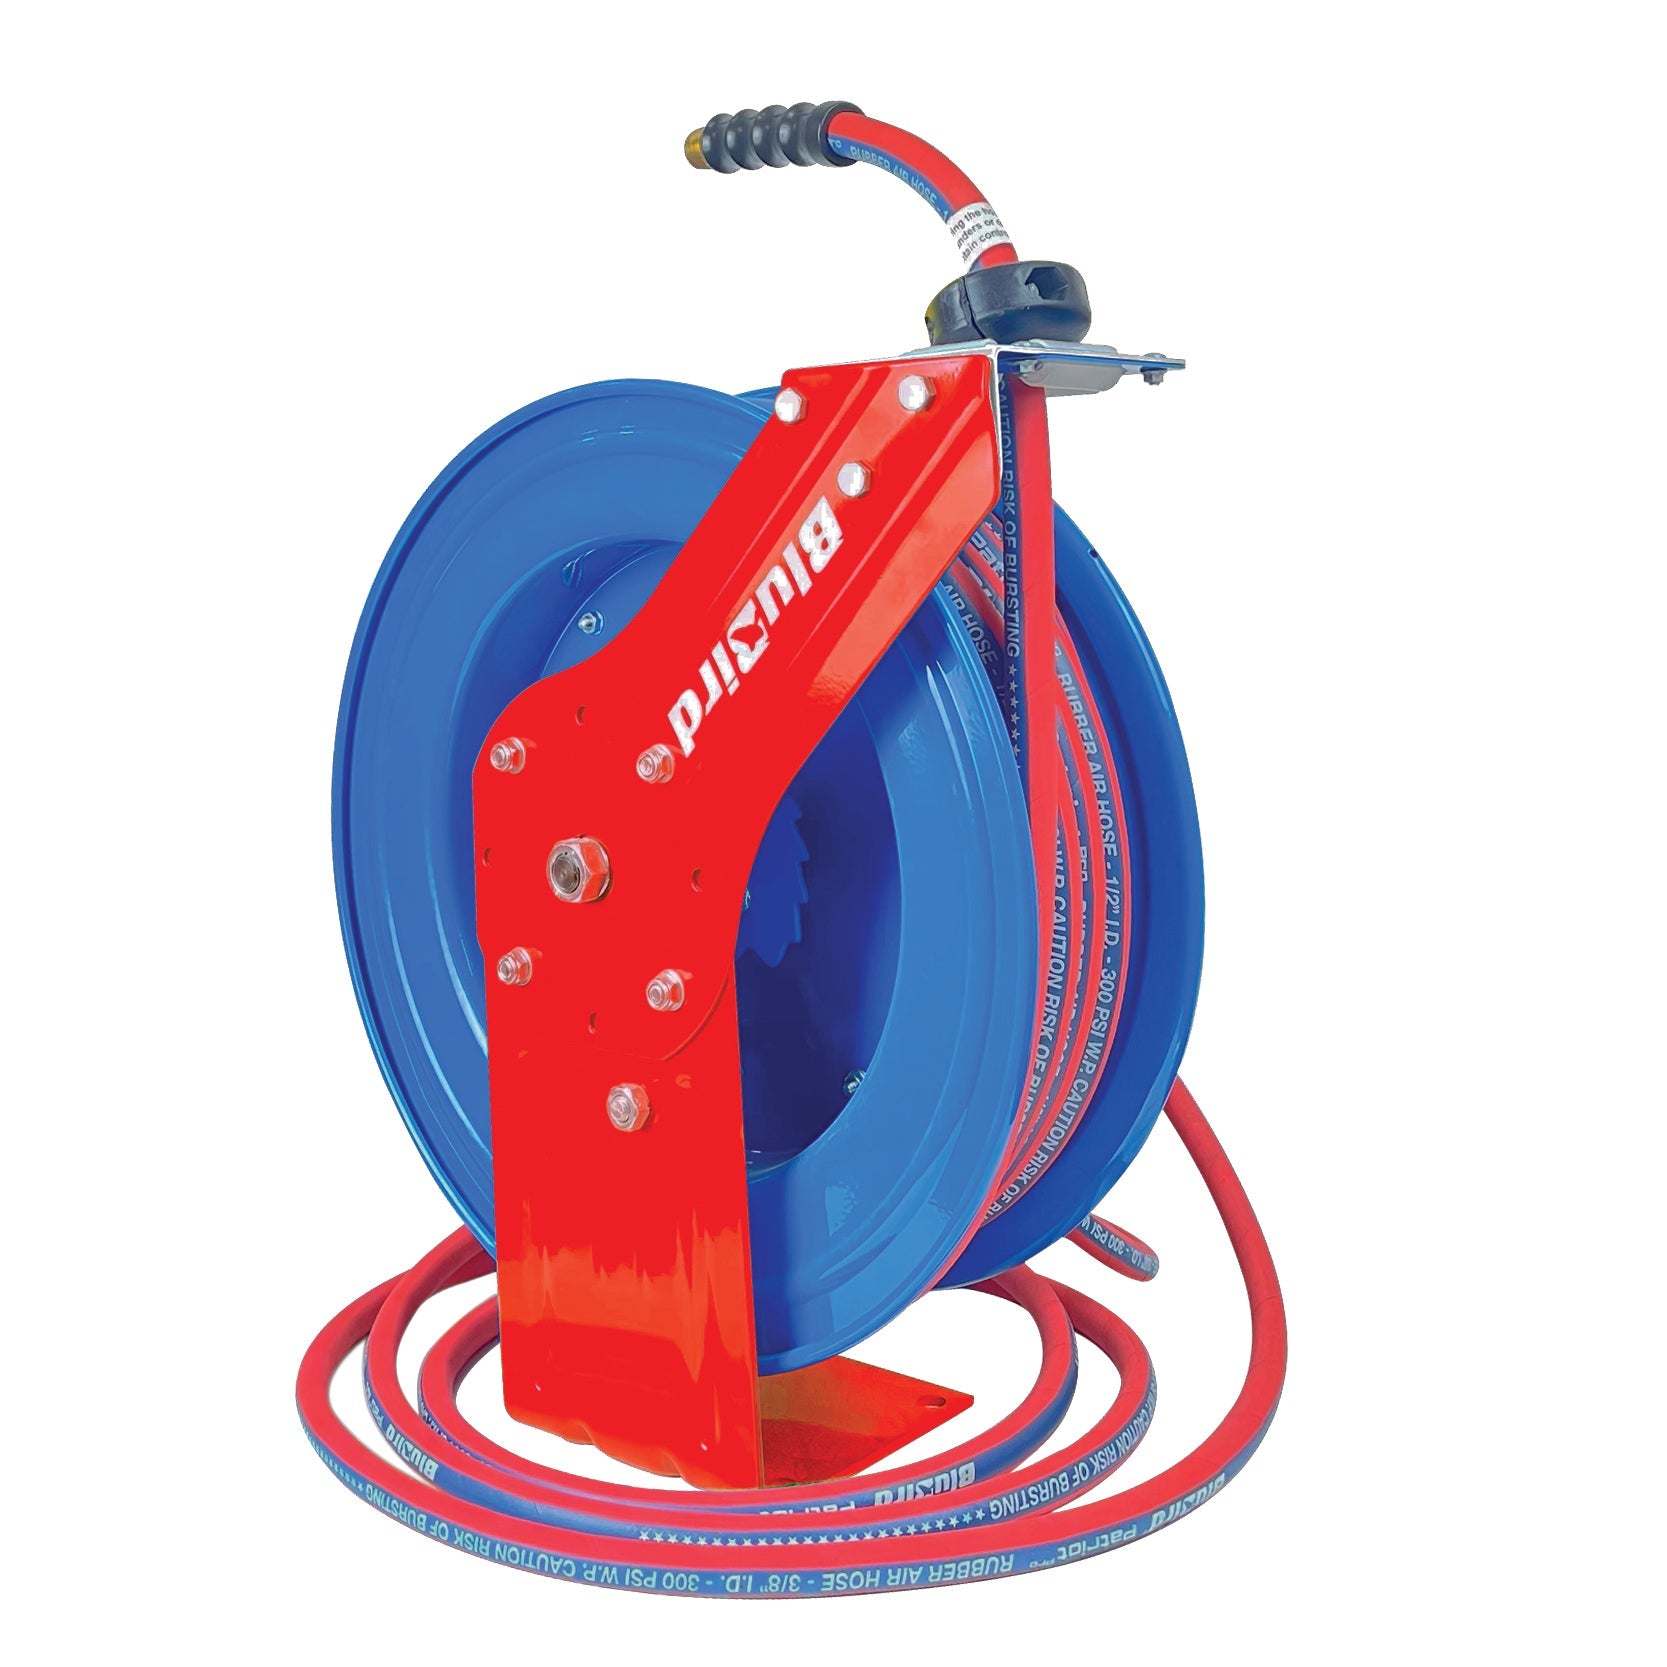 BluBird Patriot Pro Air Hose Reel 3/8" x 50' Retractable Heavy Duty Steel Construction with Rubber Hose 300 PSI